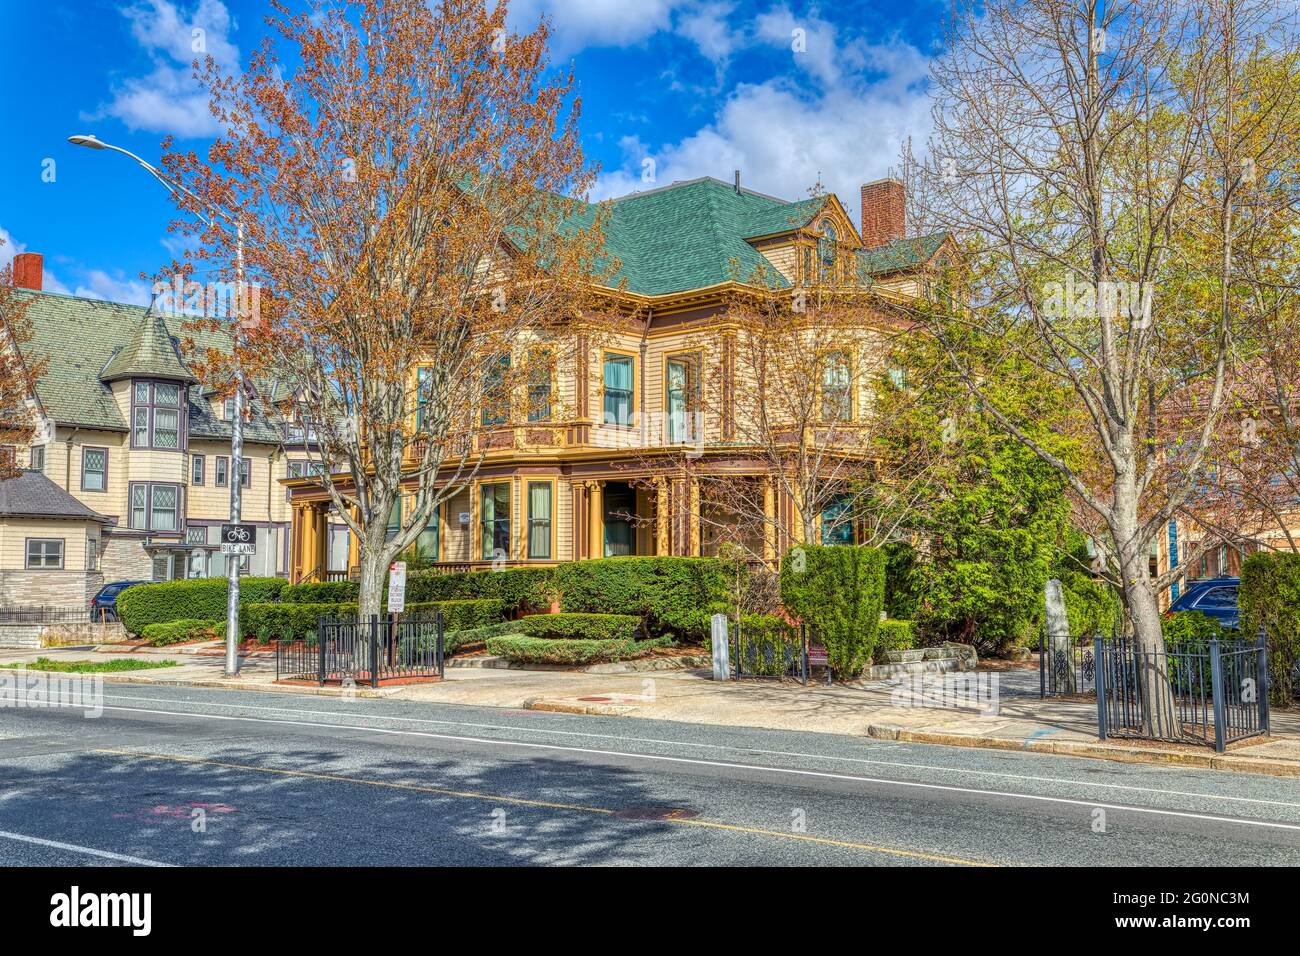 A.A. Spitz House/Tillie Spitz & Gertrude Nathanson House, 409-411 Broadway. Colonial Revival double house, built 1902. Broadway-Armory Historic Distri Stock Photo